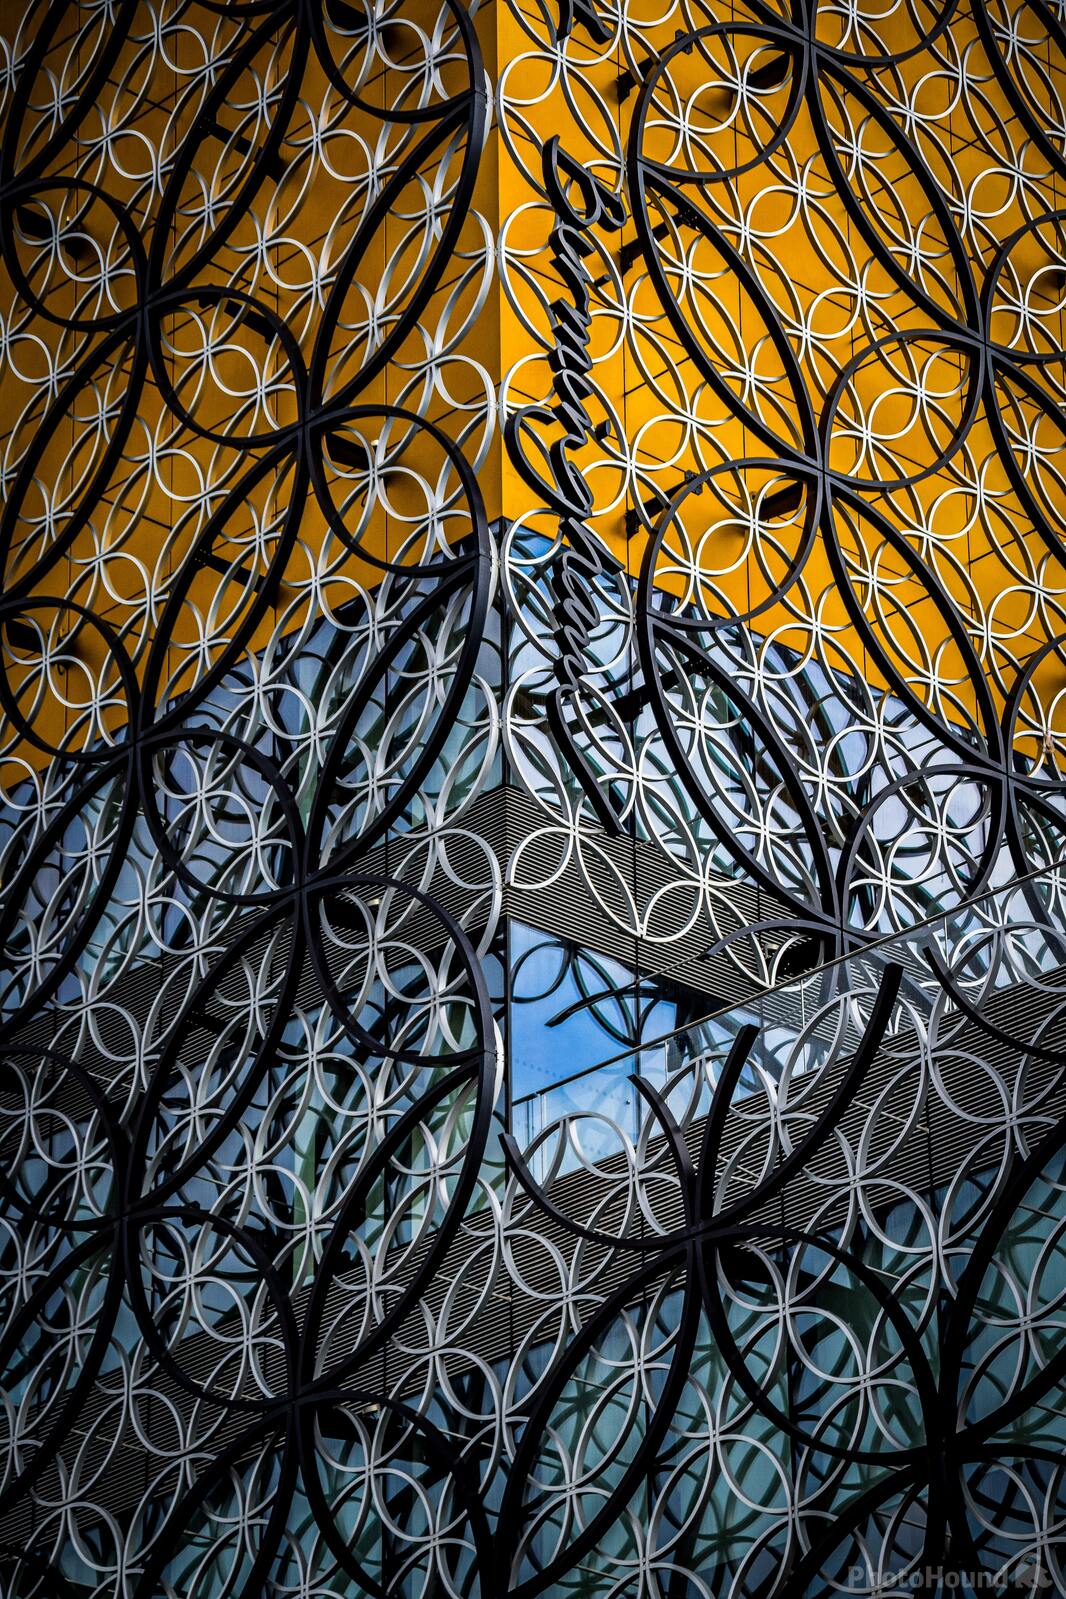 Image of Library of Birmingham - Exterior by Team PhotoHound